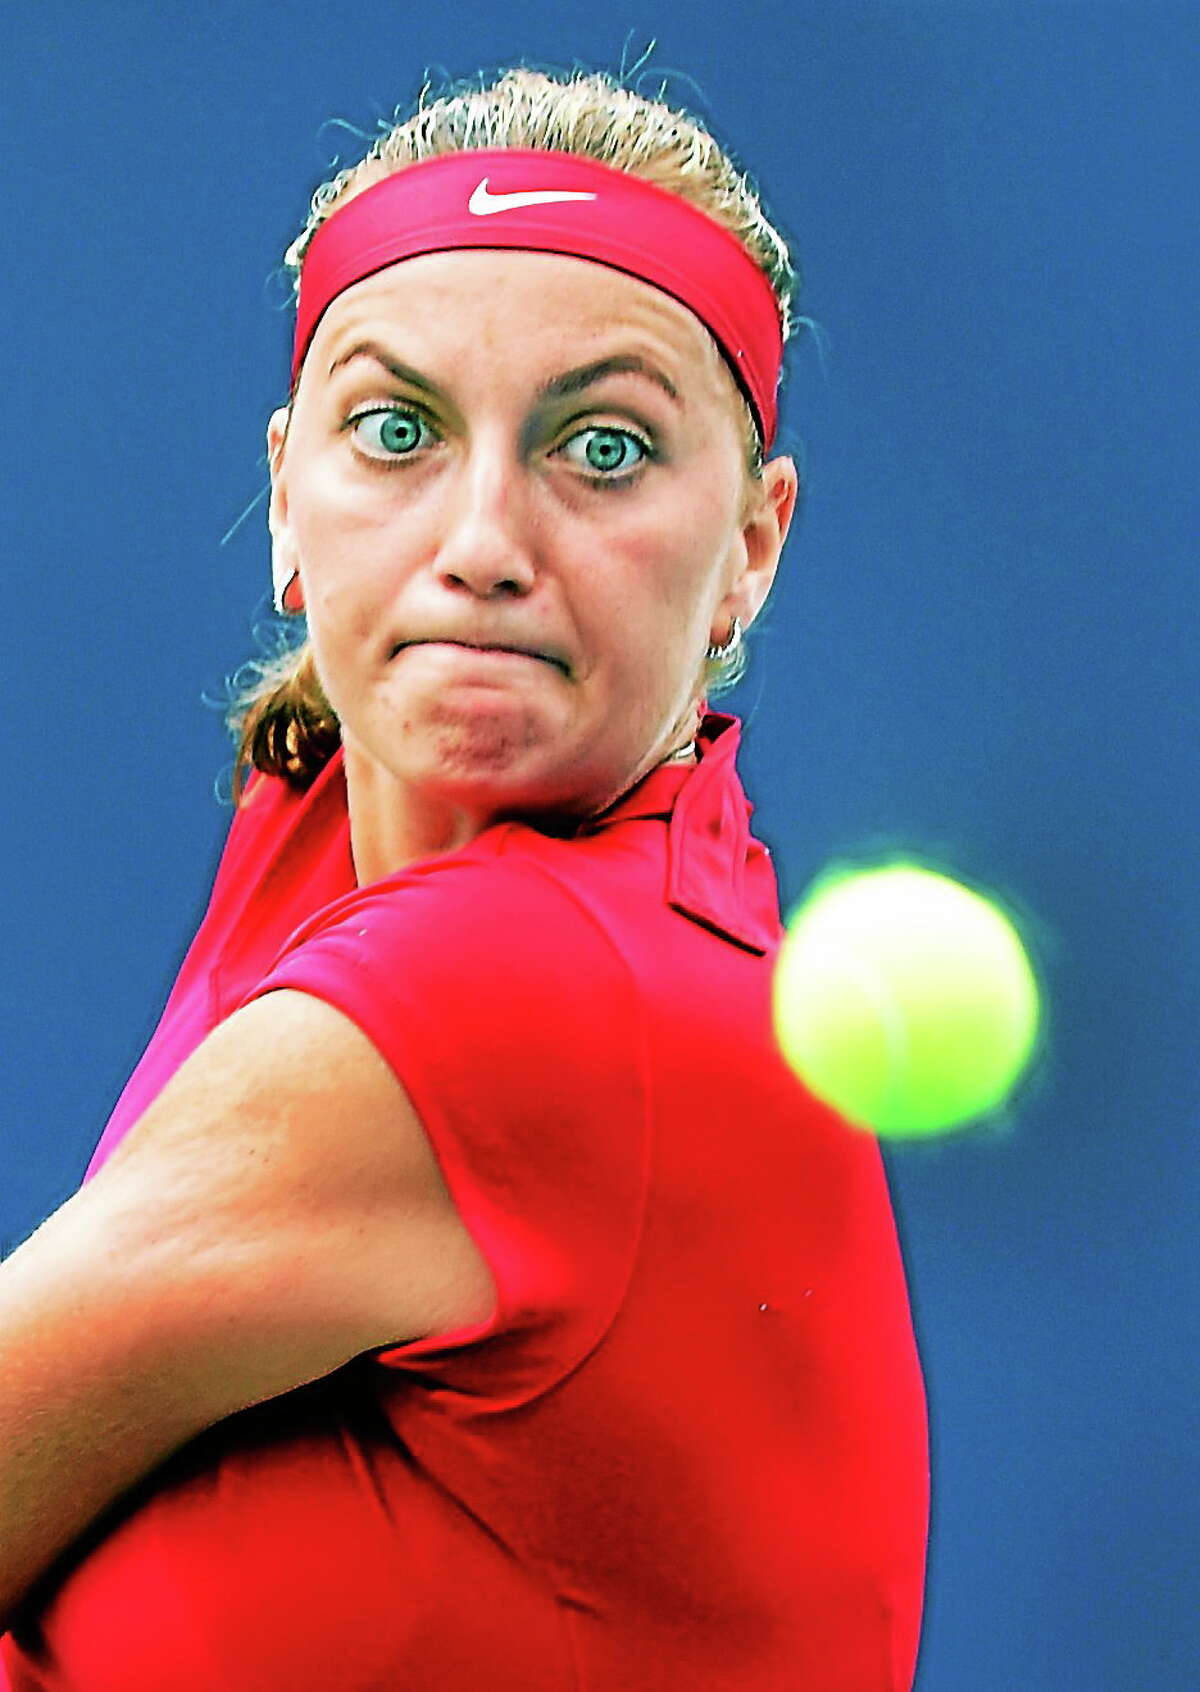 Petra Kvitova volleys with Magdalena Rybarikova during the singles final at the Connecticut Open on Saturday at the Connecticut Tennis Center. Kvitova, the second seed, defeated Rybarikova 6-4, 6-2 to win her second championship in New Haven.